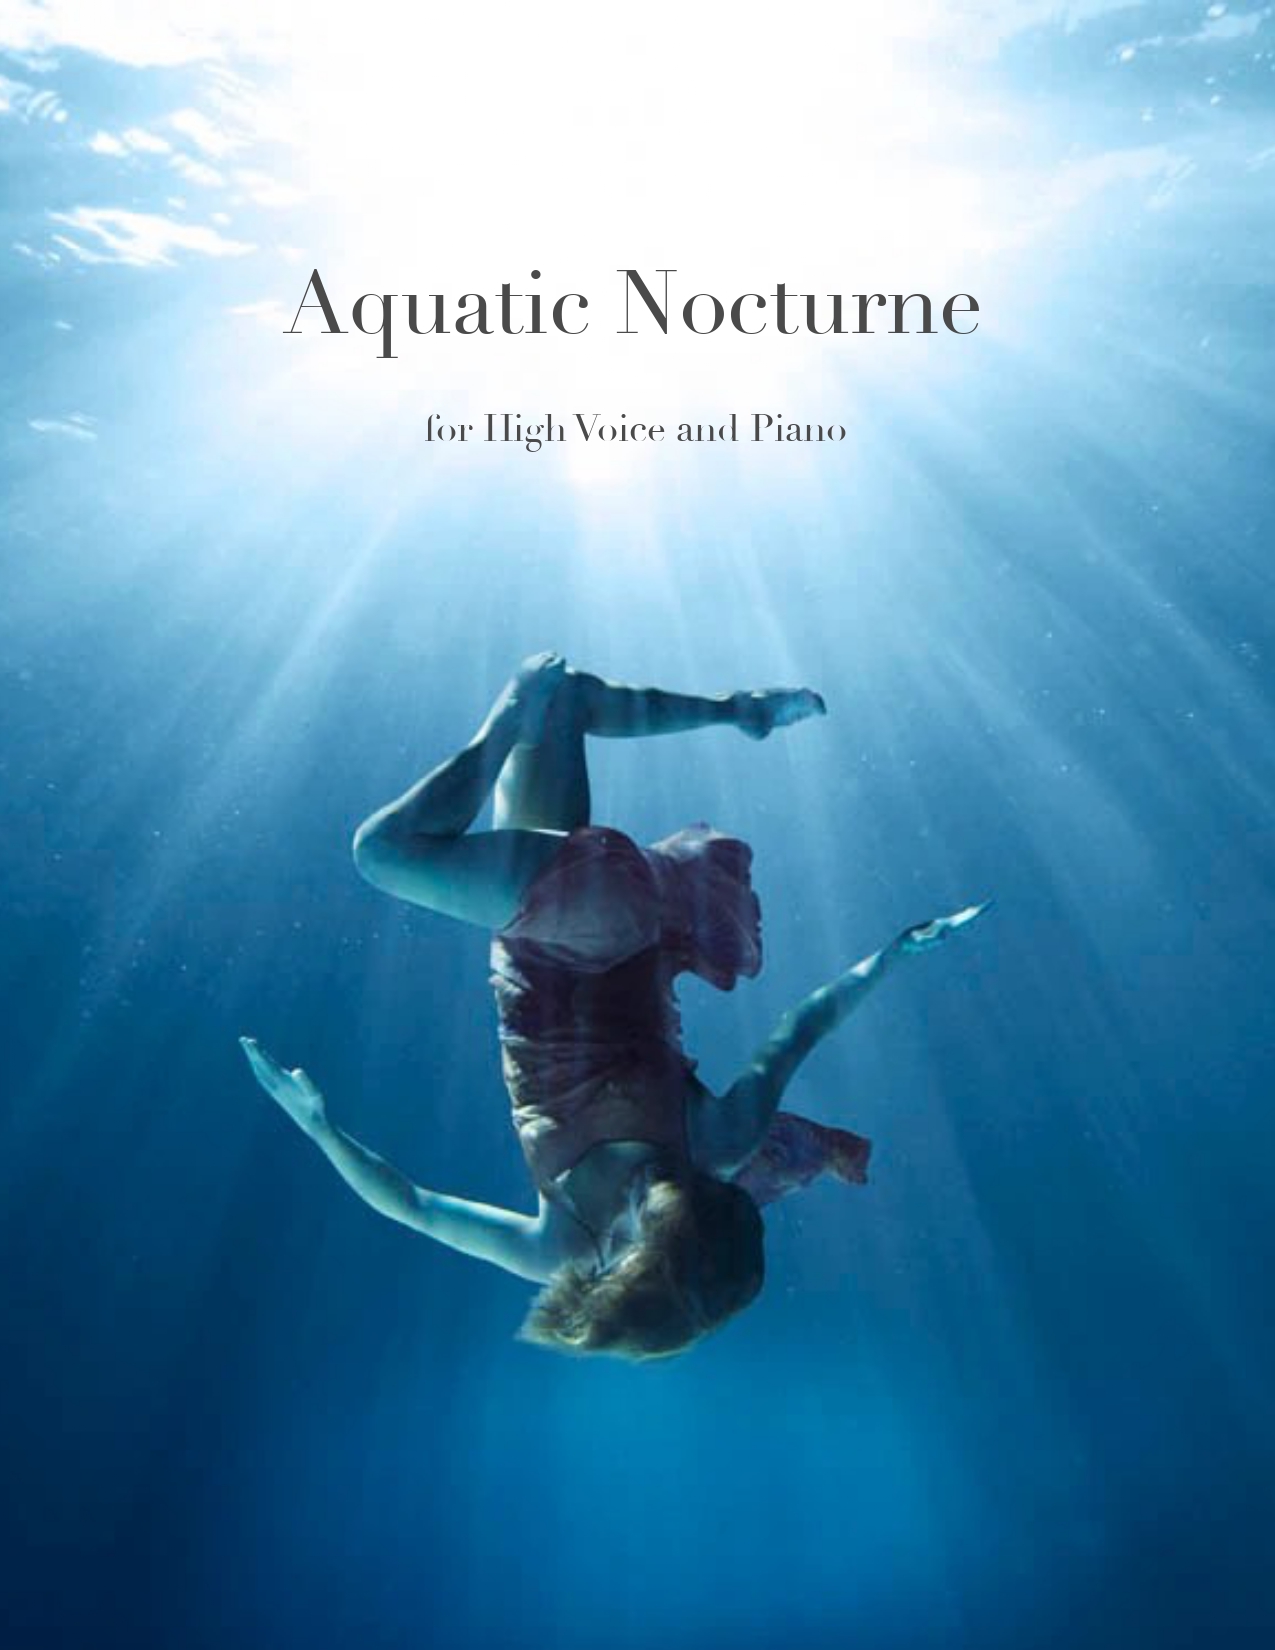 Aquatic Nocturne Score for High Voice and Piano